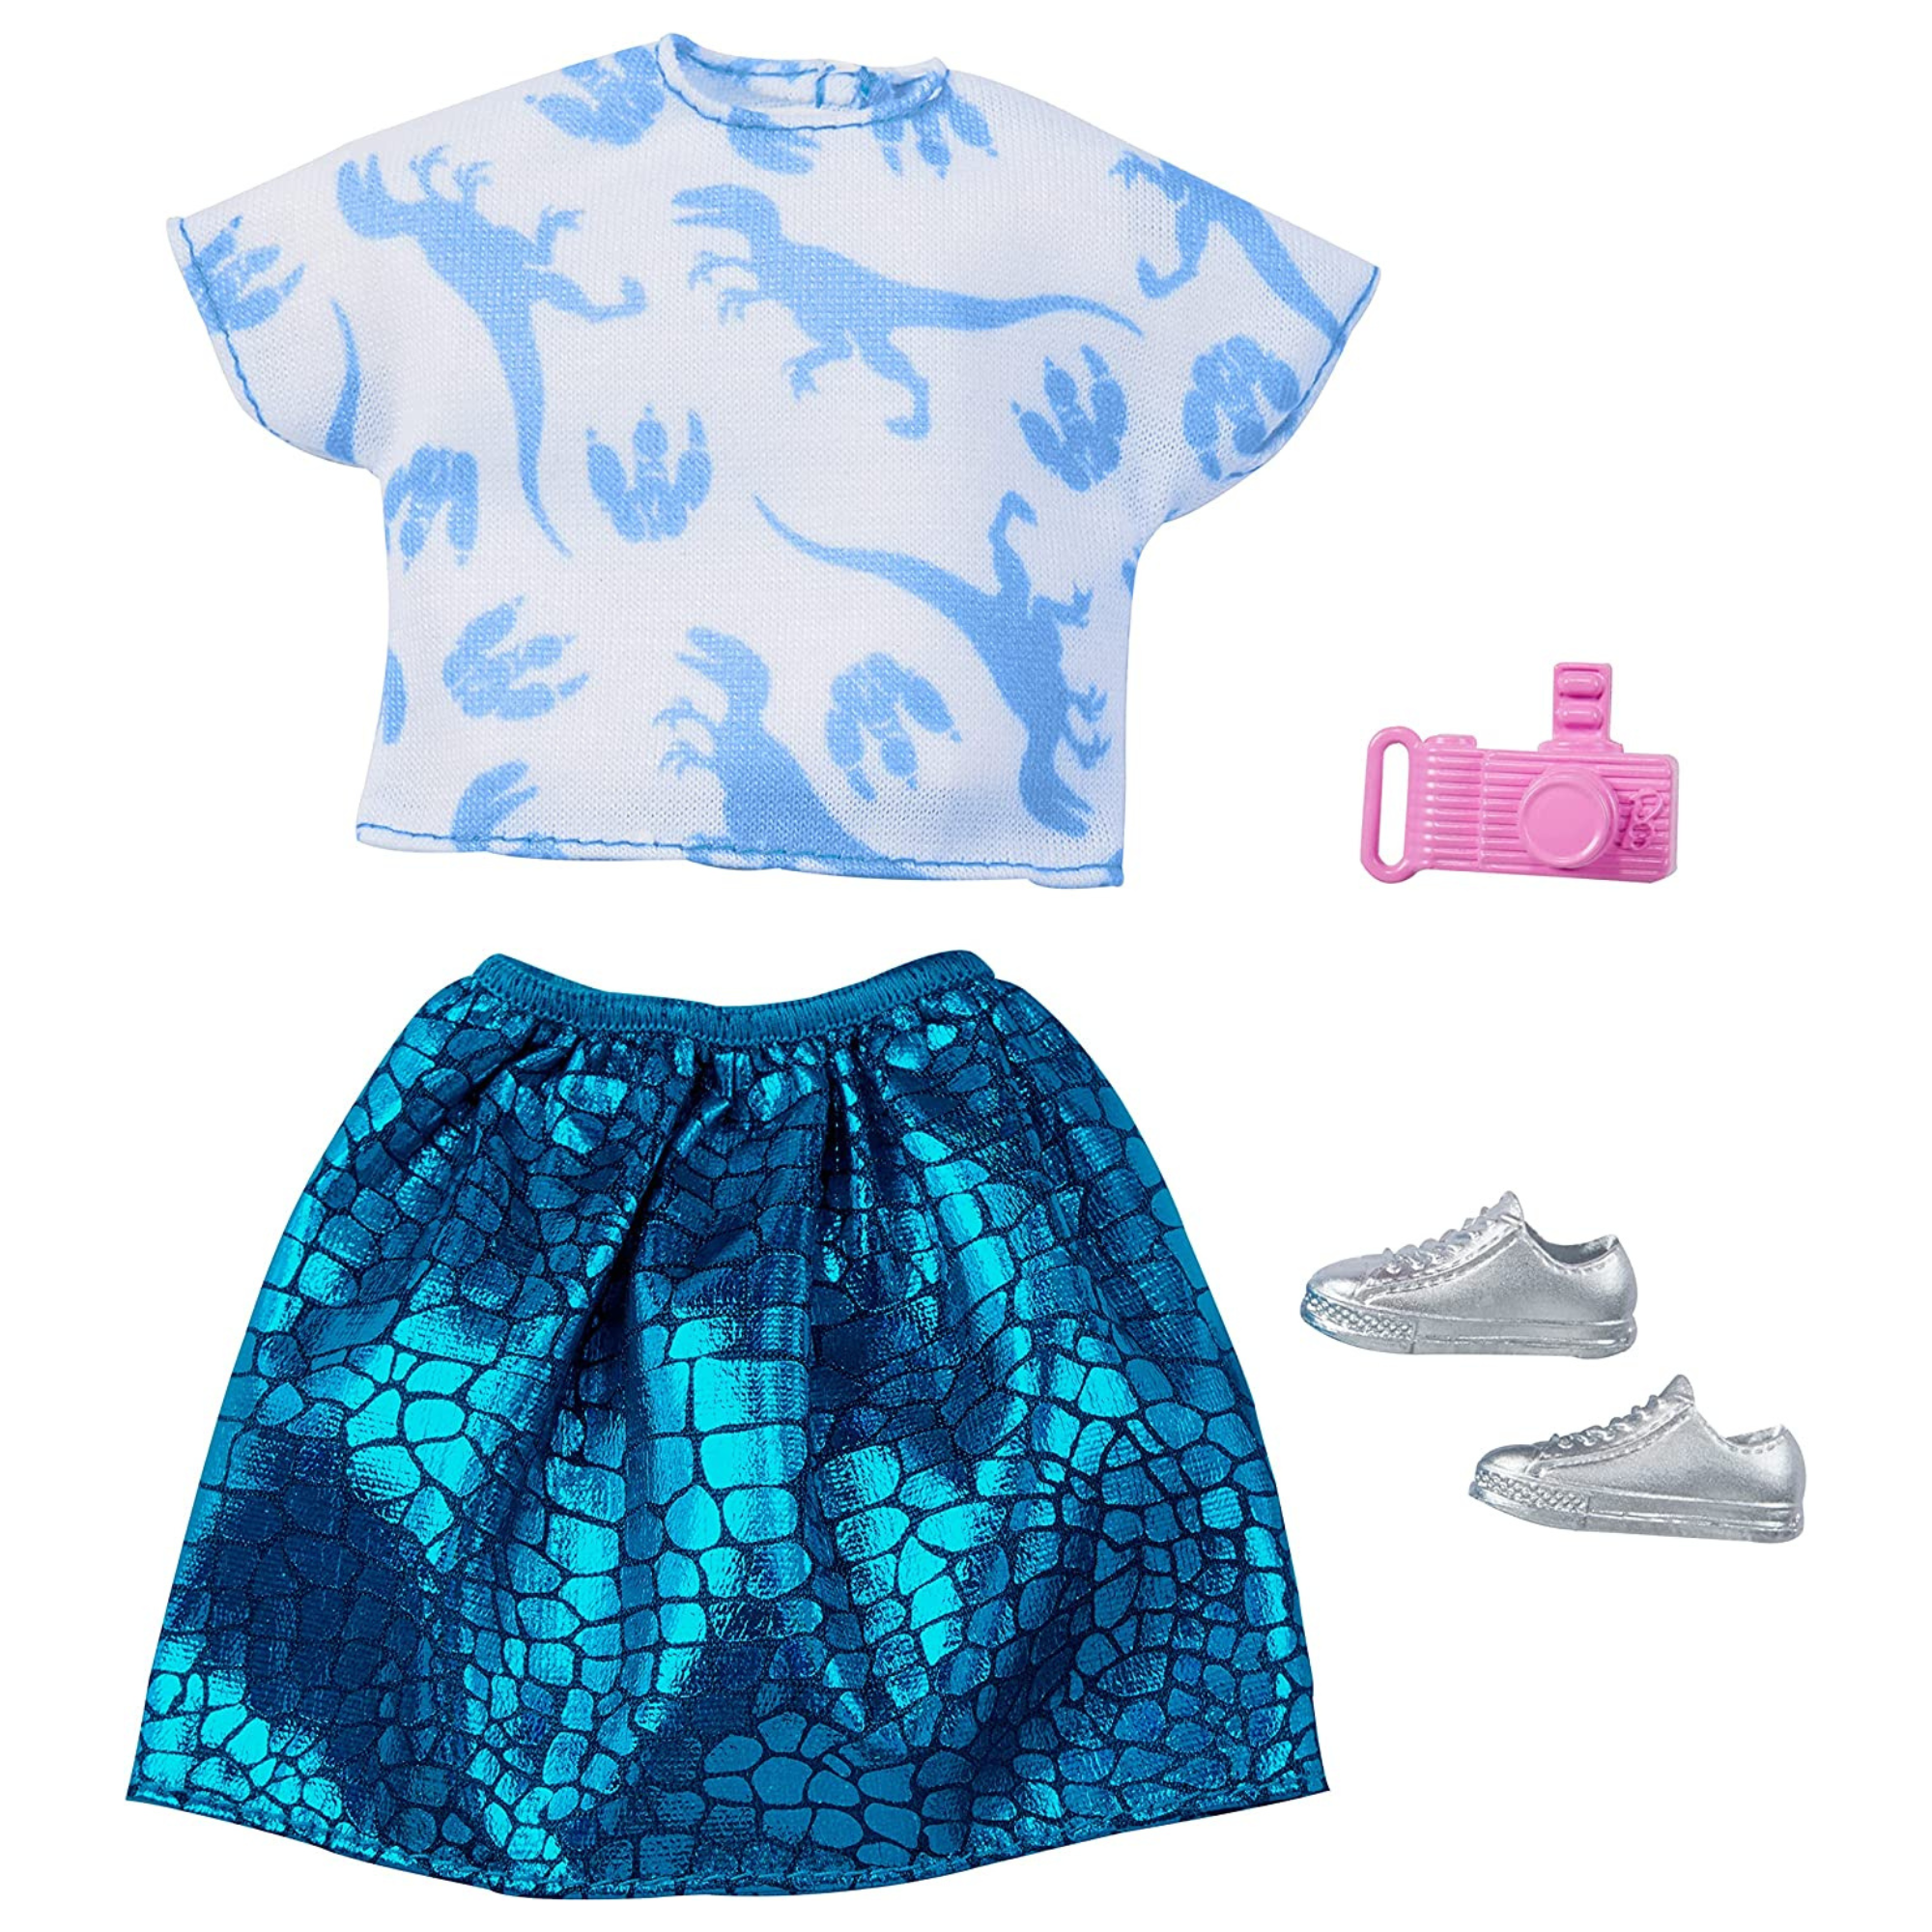 Barbie Jurassic World Fashion Look Pack -Turquoise Shiny Skirt with Shirt, Shoes and Camera Shoes and Necklace - Toptoys2u